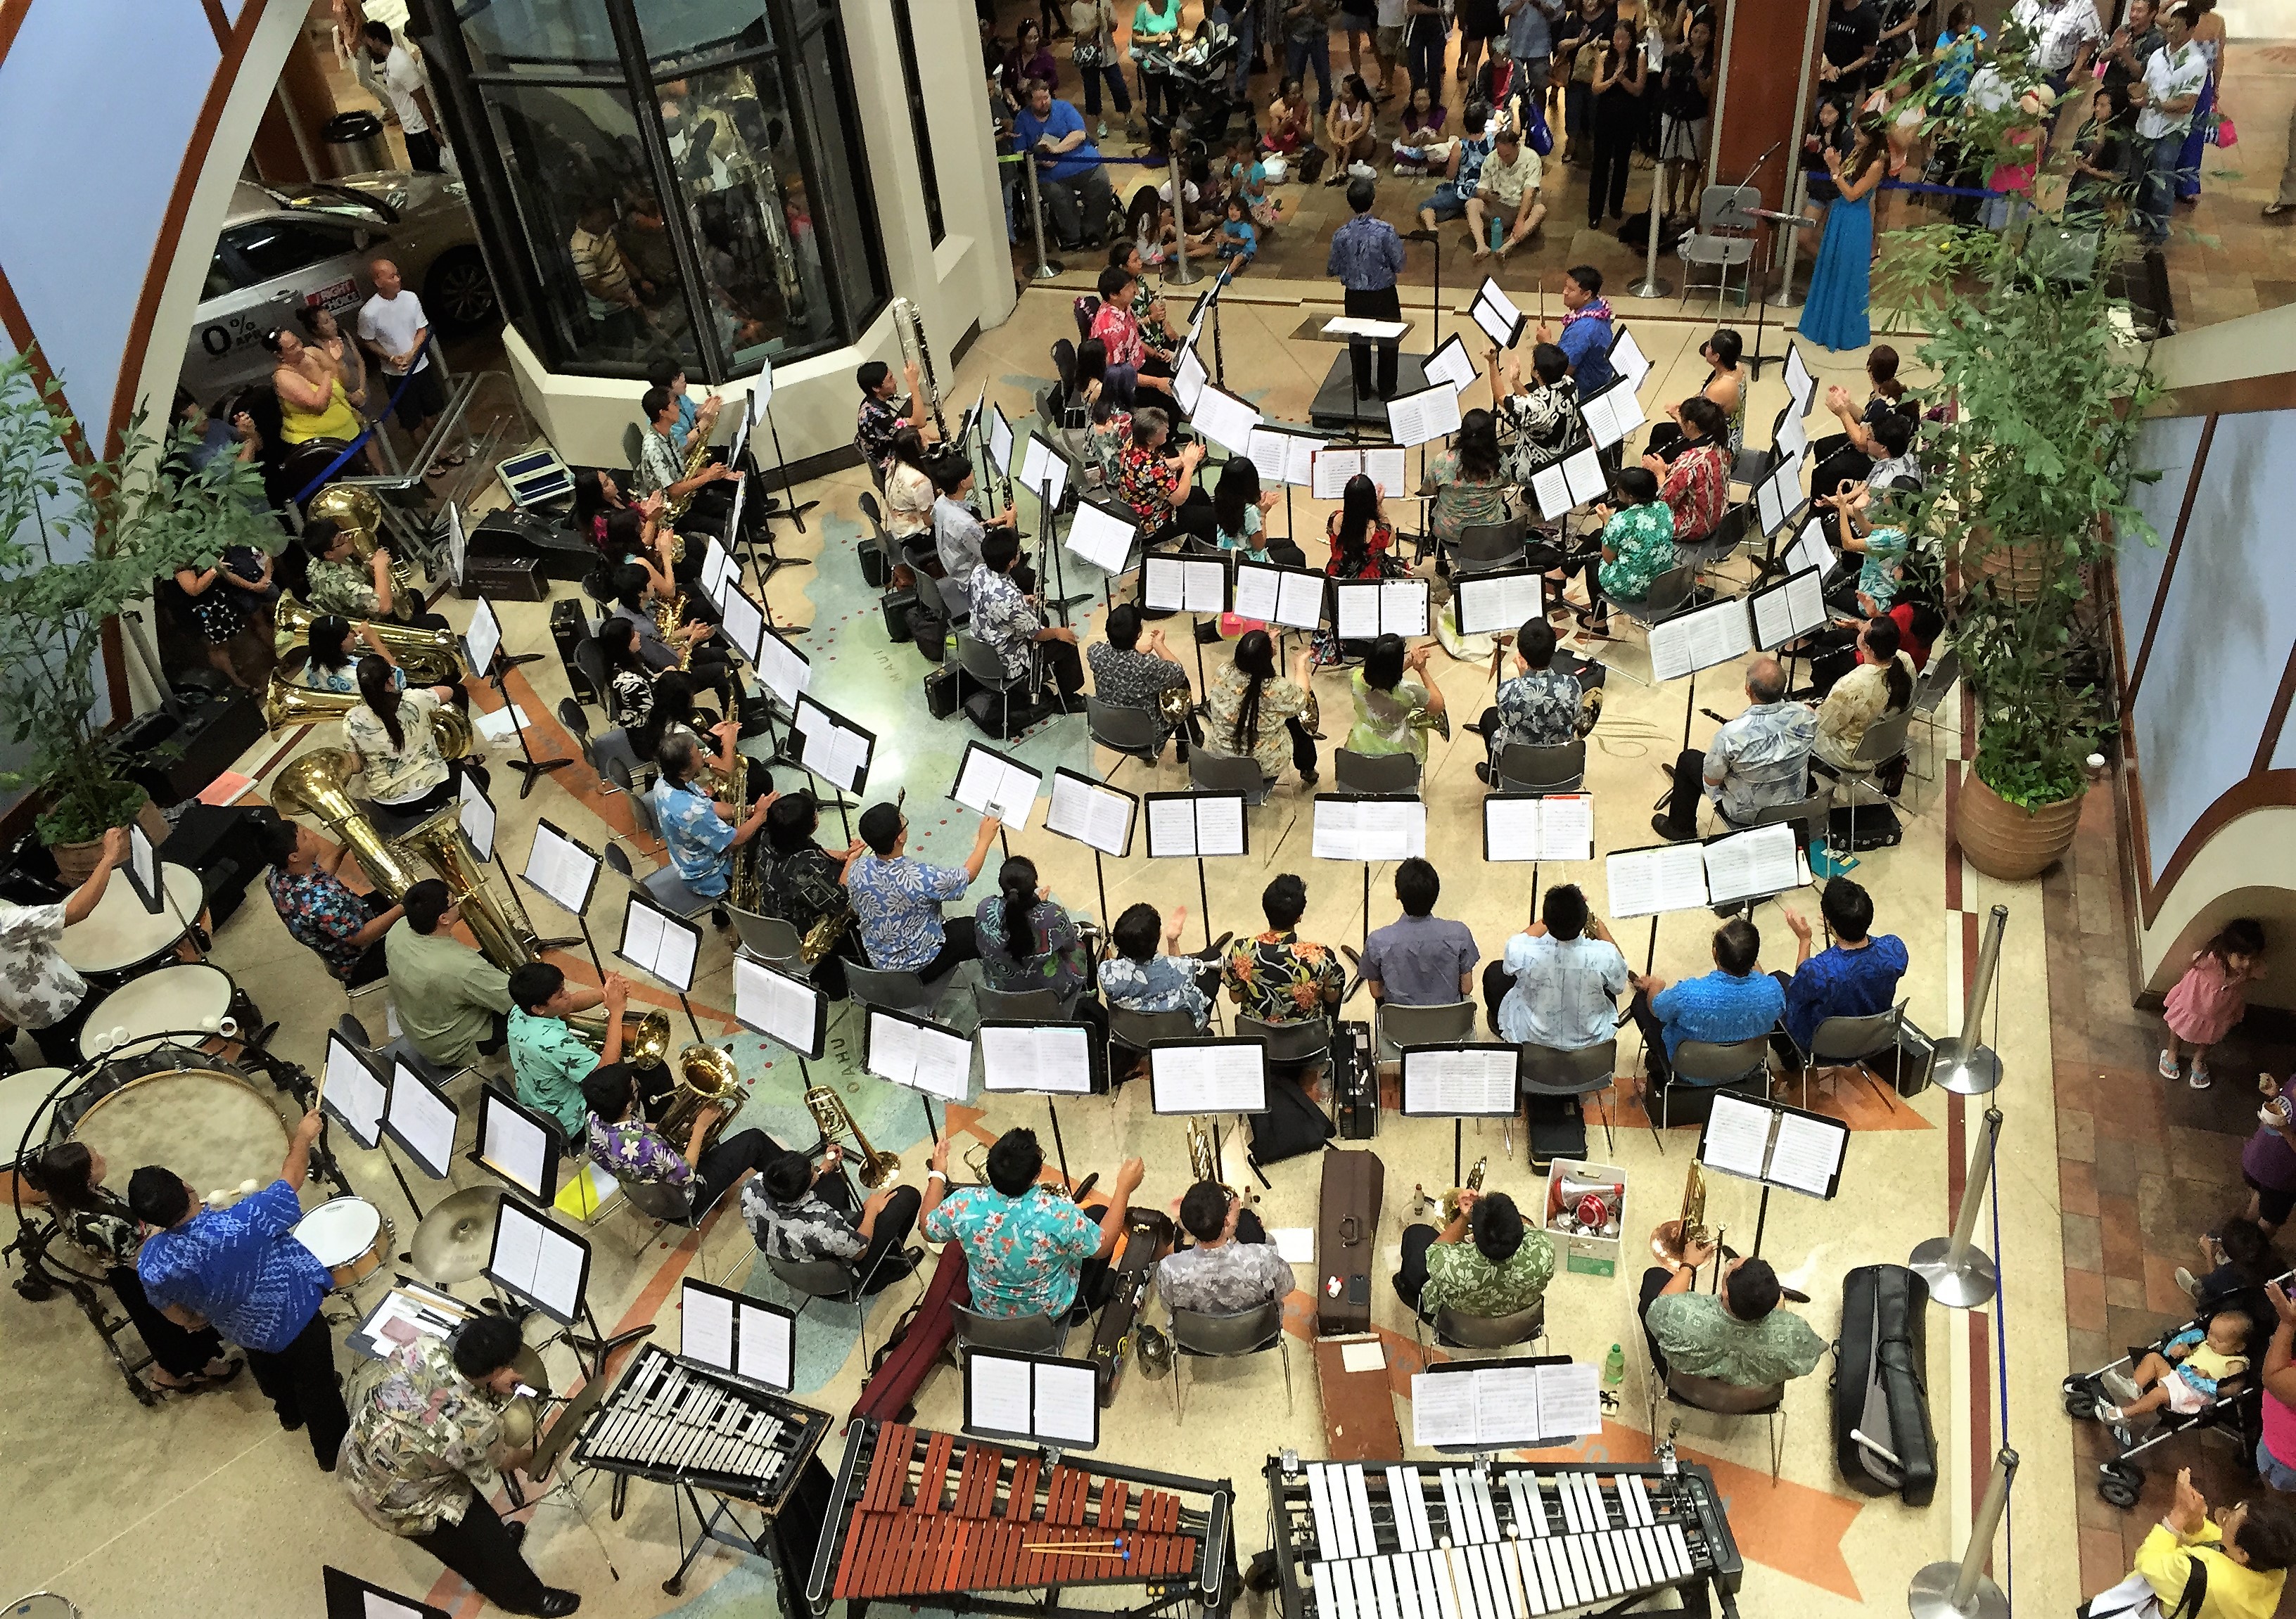 The UH West Oahu University Band at an earlier Pearlridge Center performance